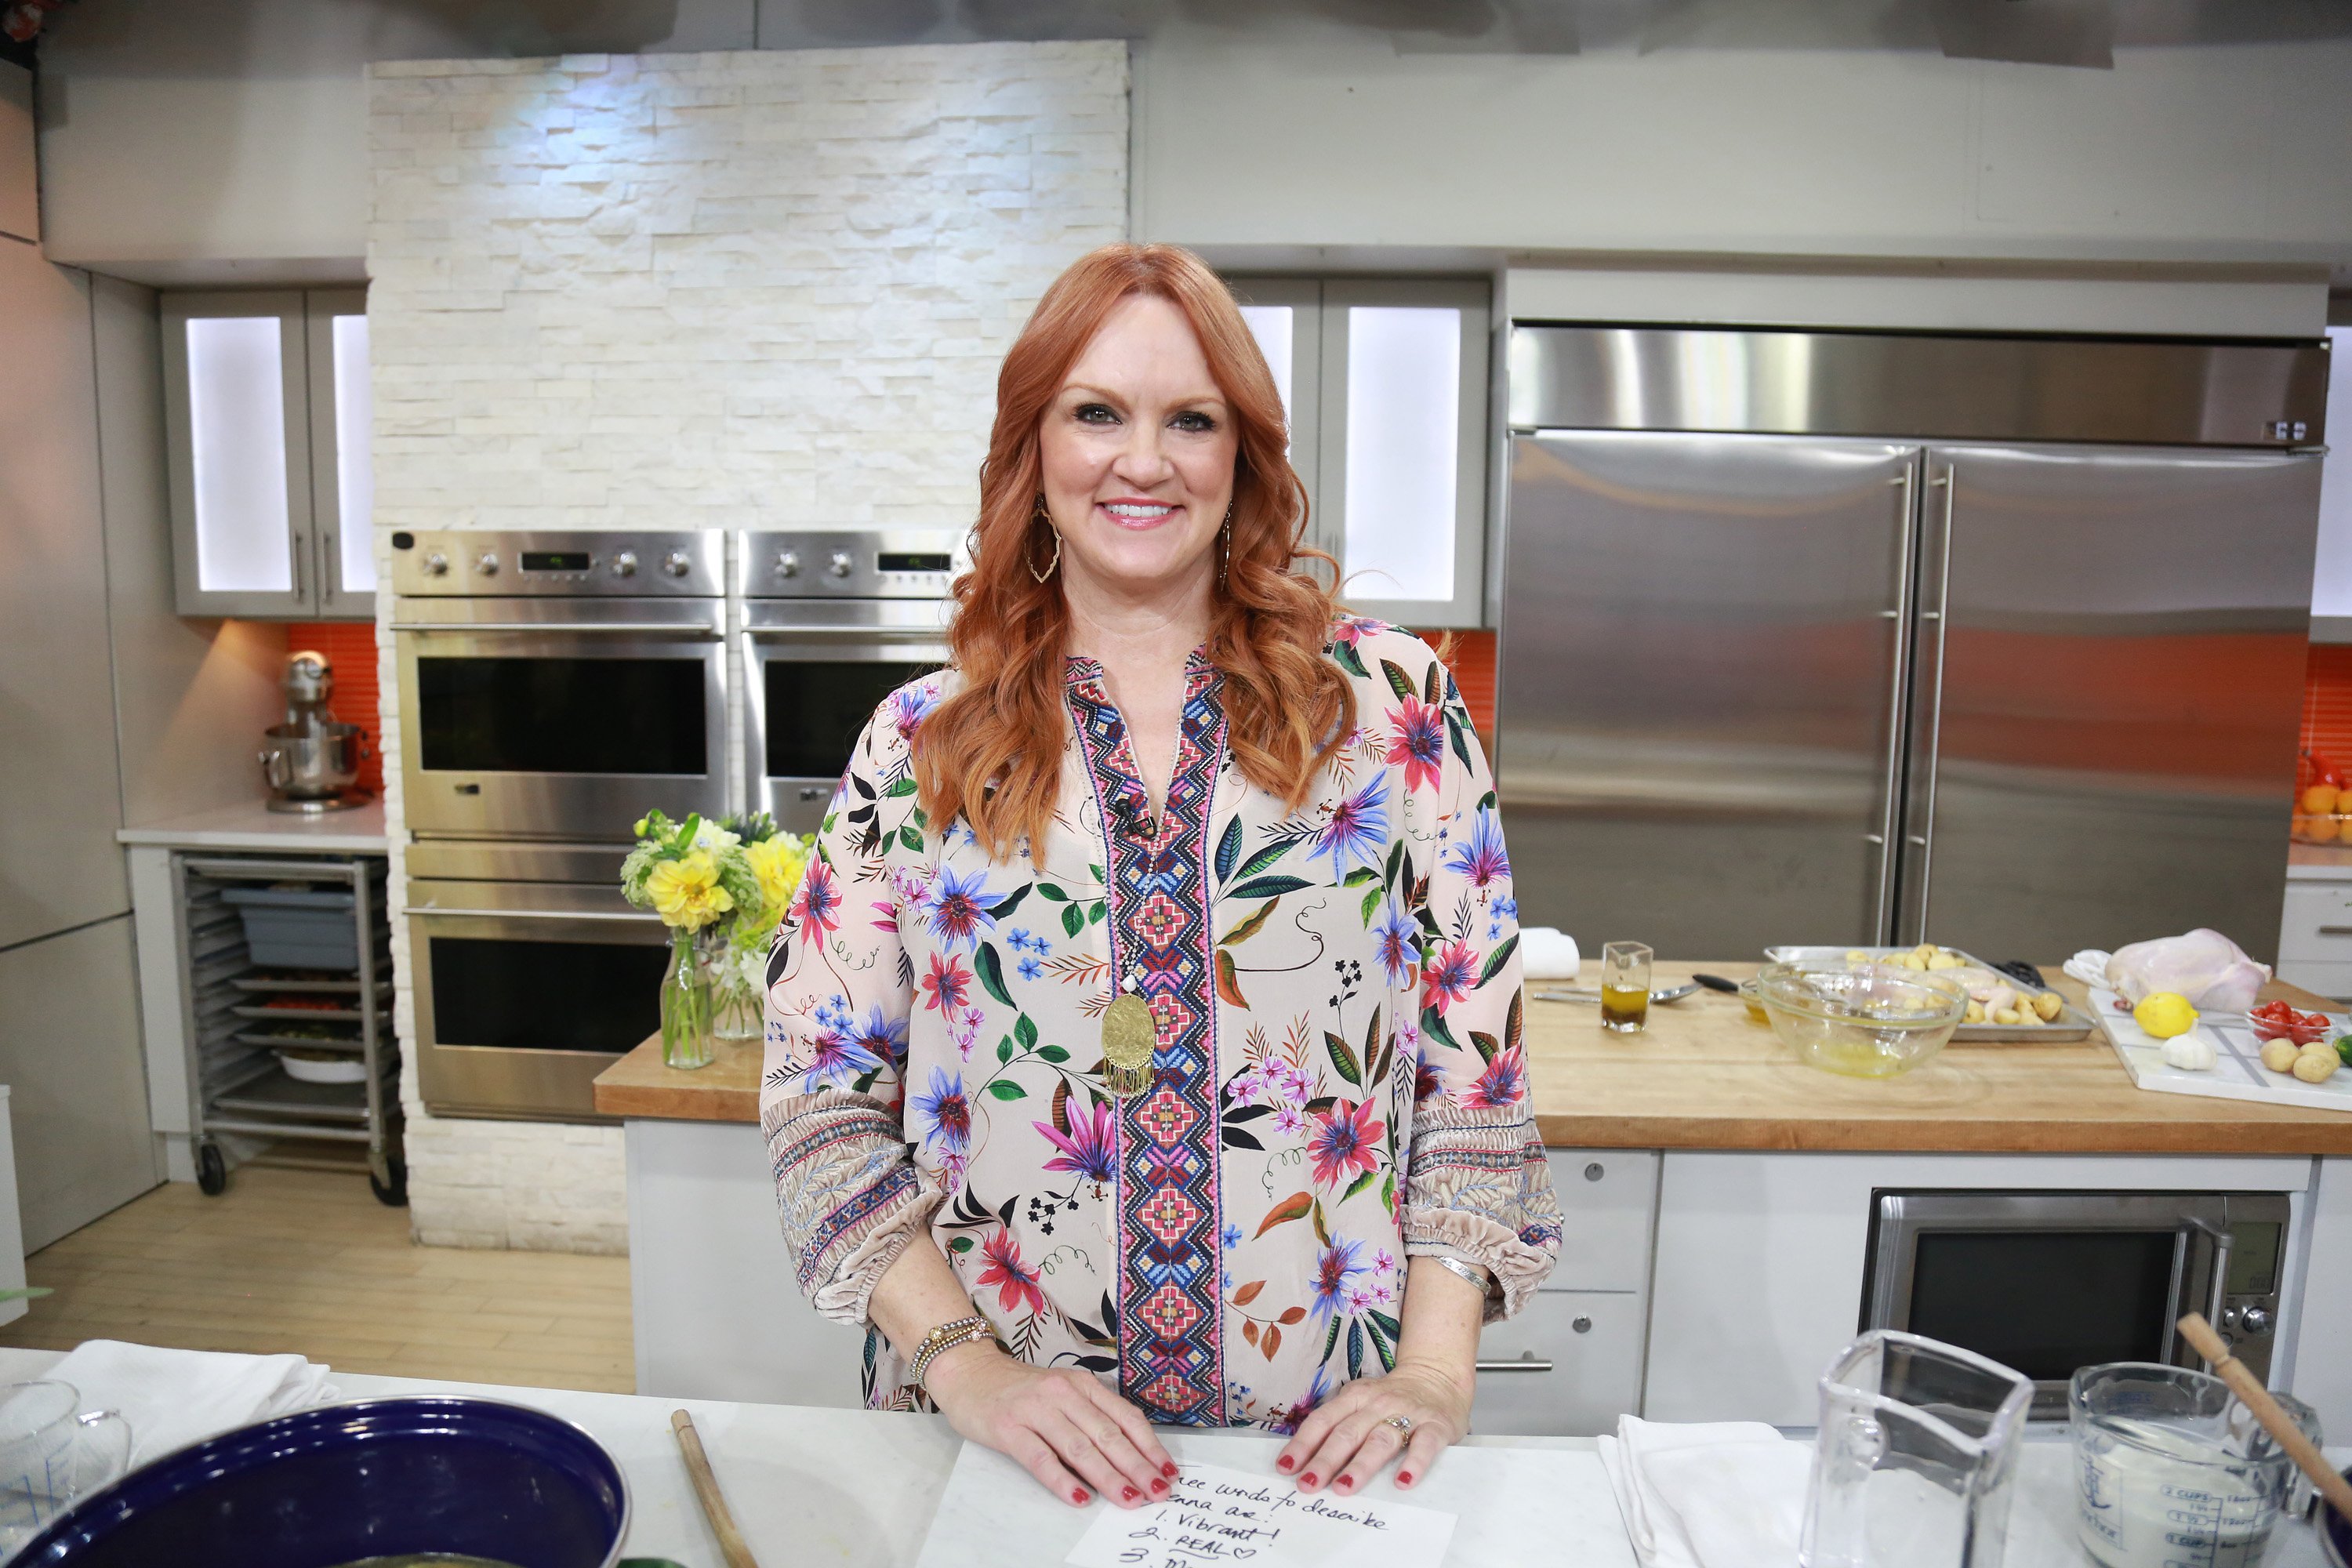 ‘The Pioneer Woman’ Ree Drummond and Lea Michele Love This Easy Breakfast Recipe